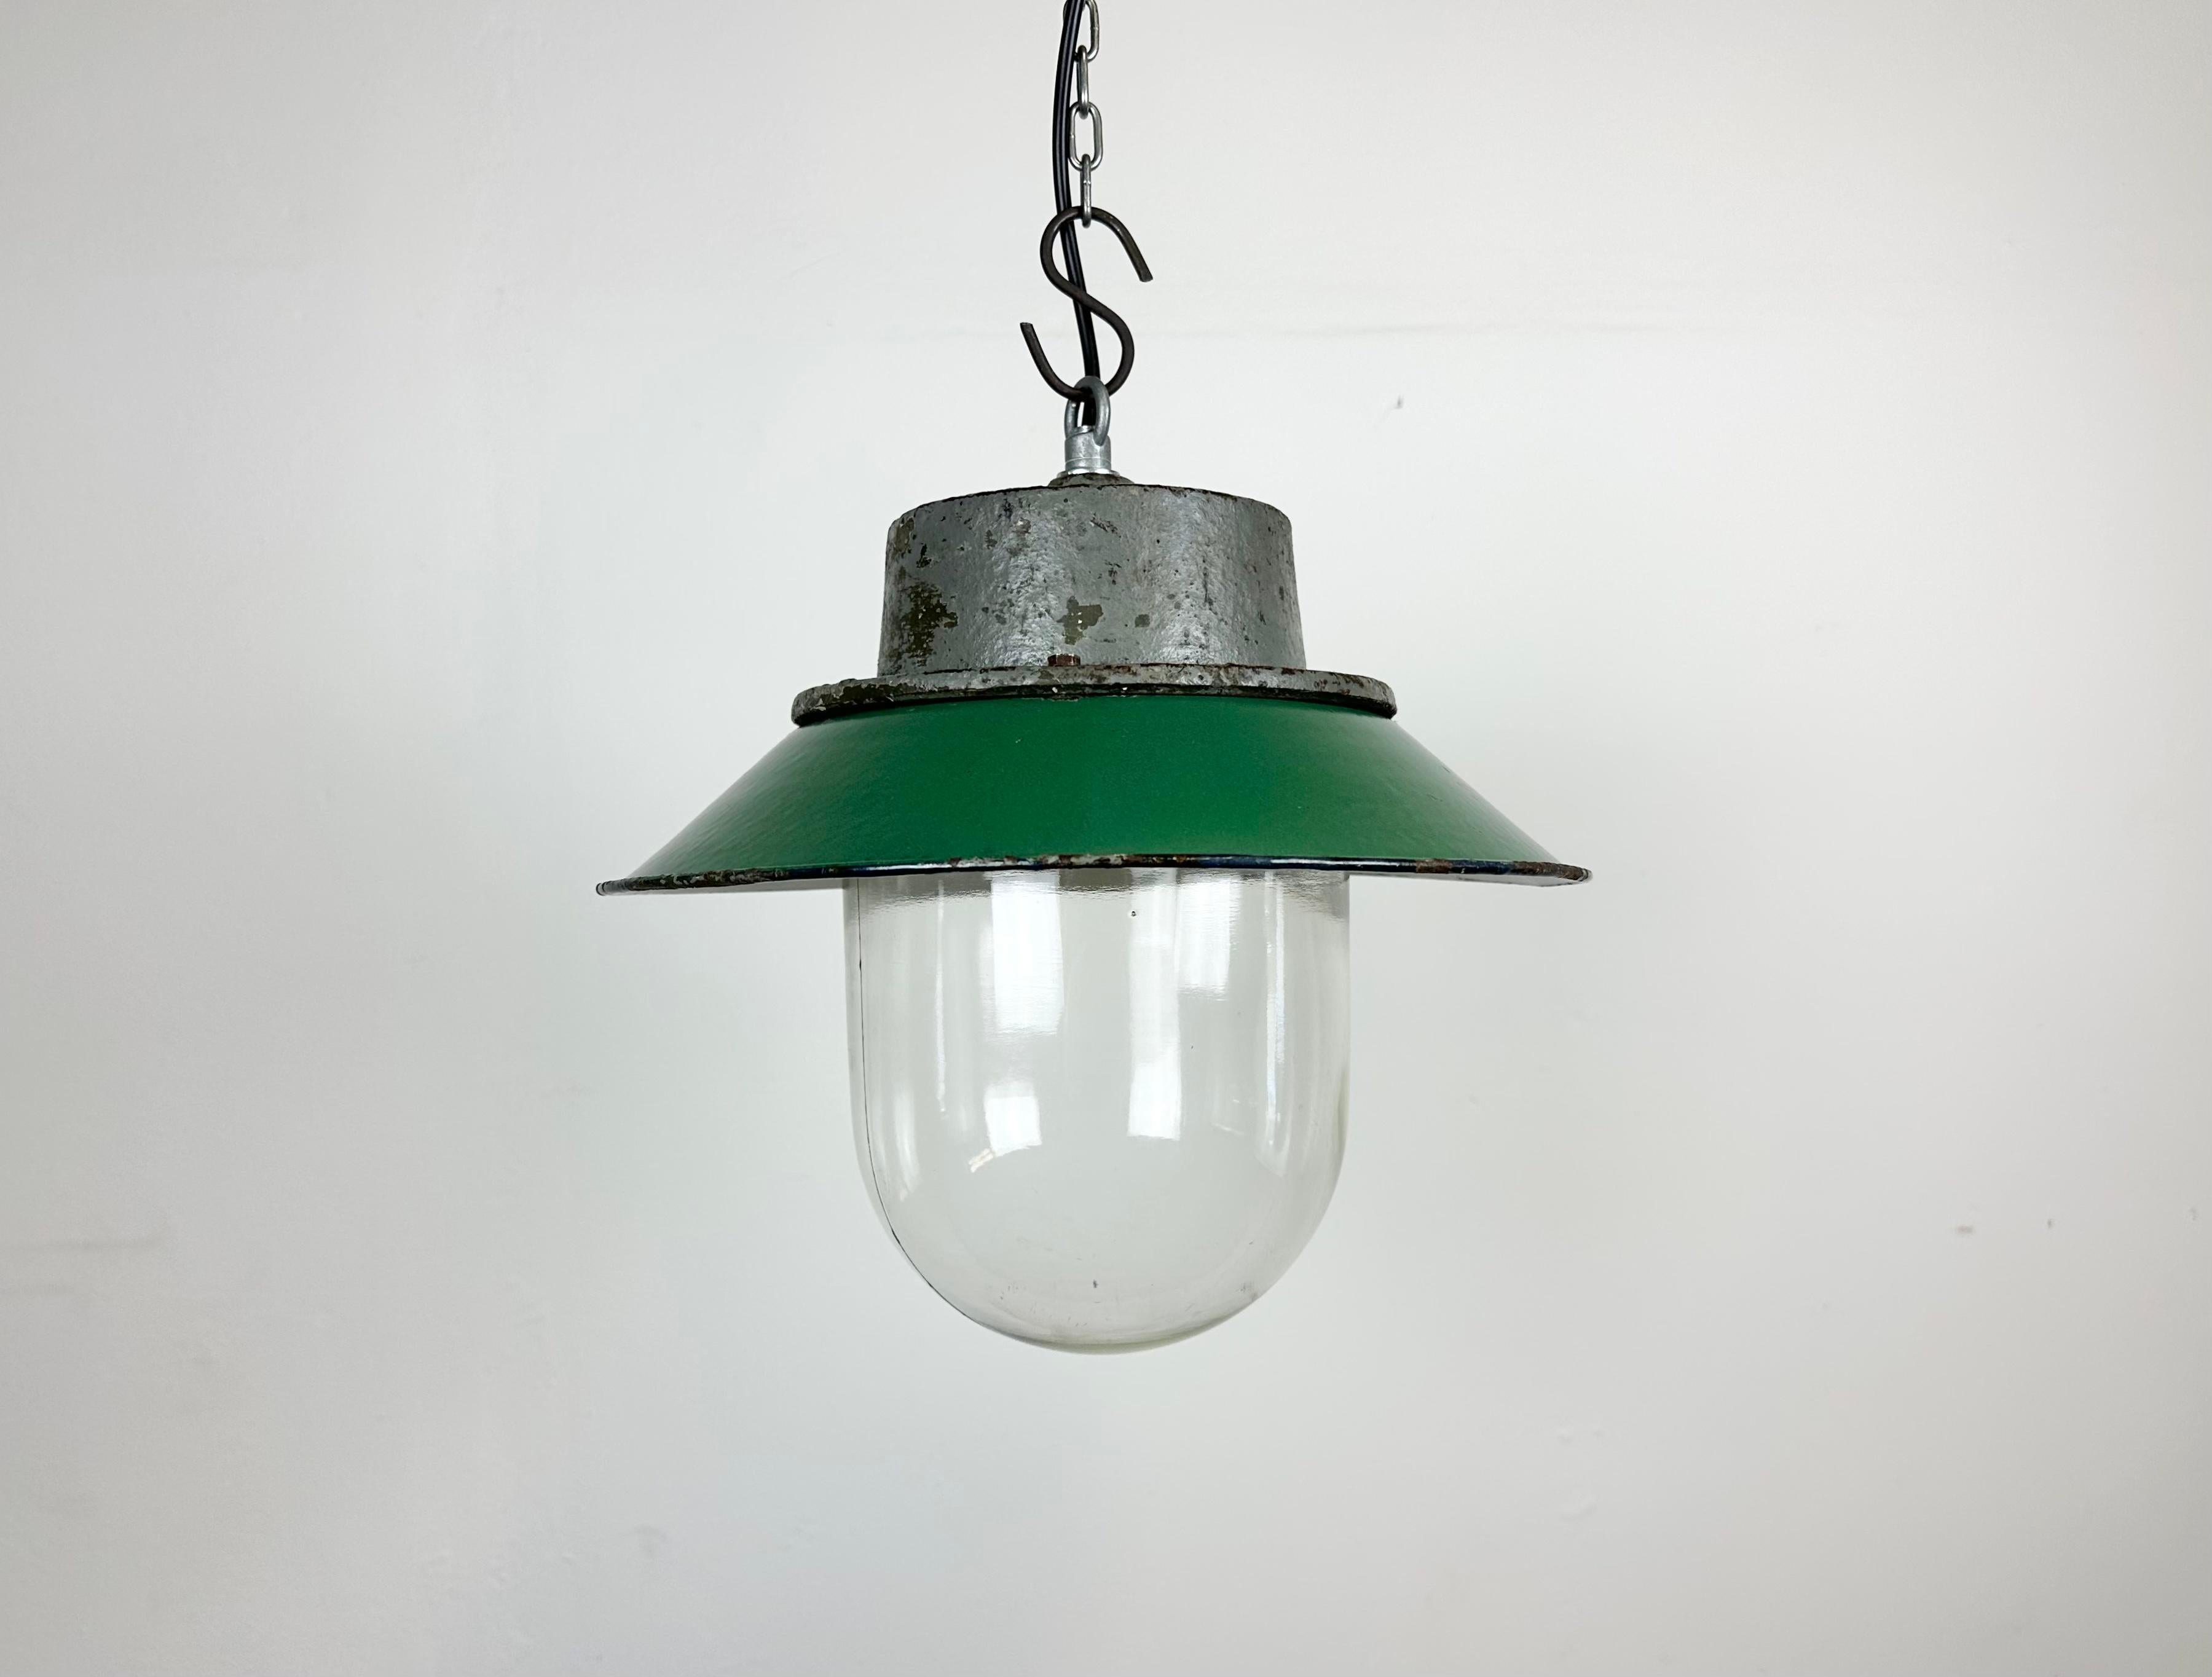 Industrial hanging lamp manufactured in Poland during the 1960s. It features a green enamel shade with a white enamel interior, a grey cast iron top, and a clear glass cover. The porcelain socket requires E 27/ E26 lightbulbs. New wire. The weight